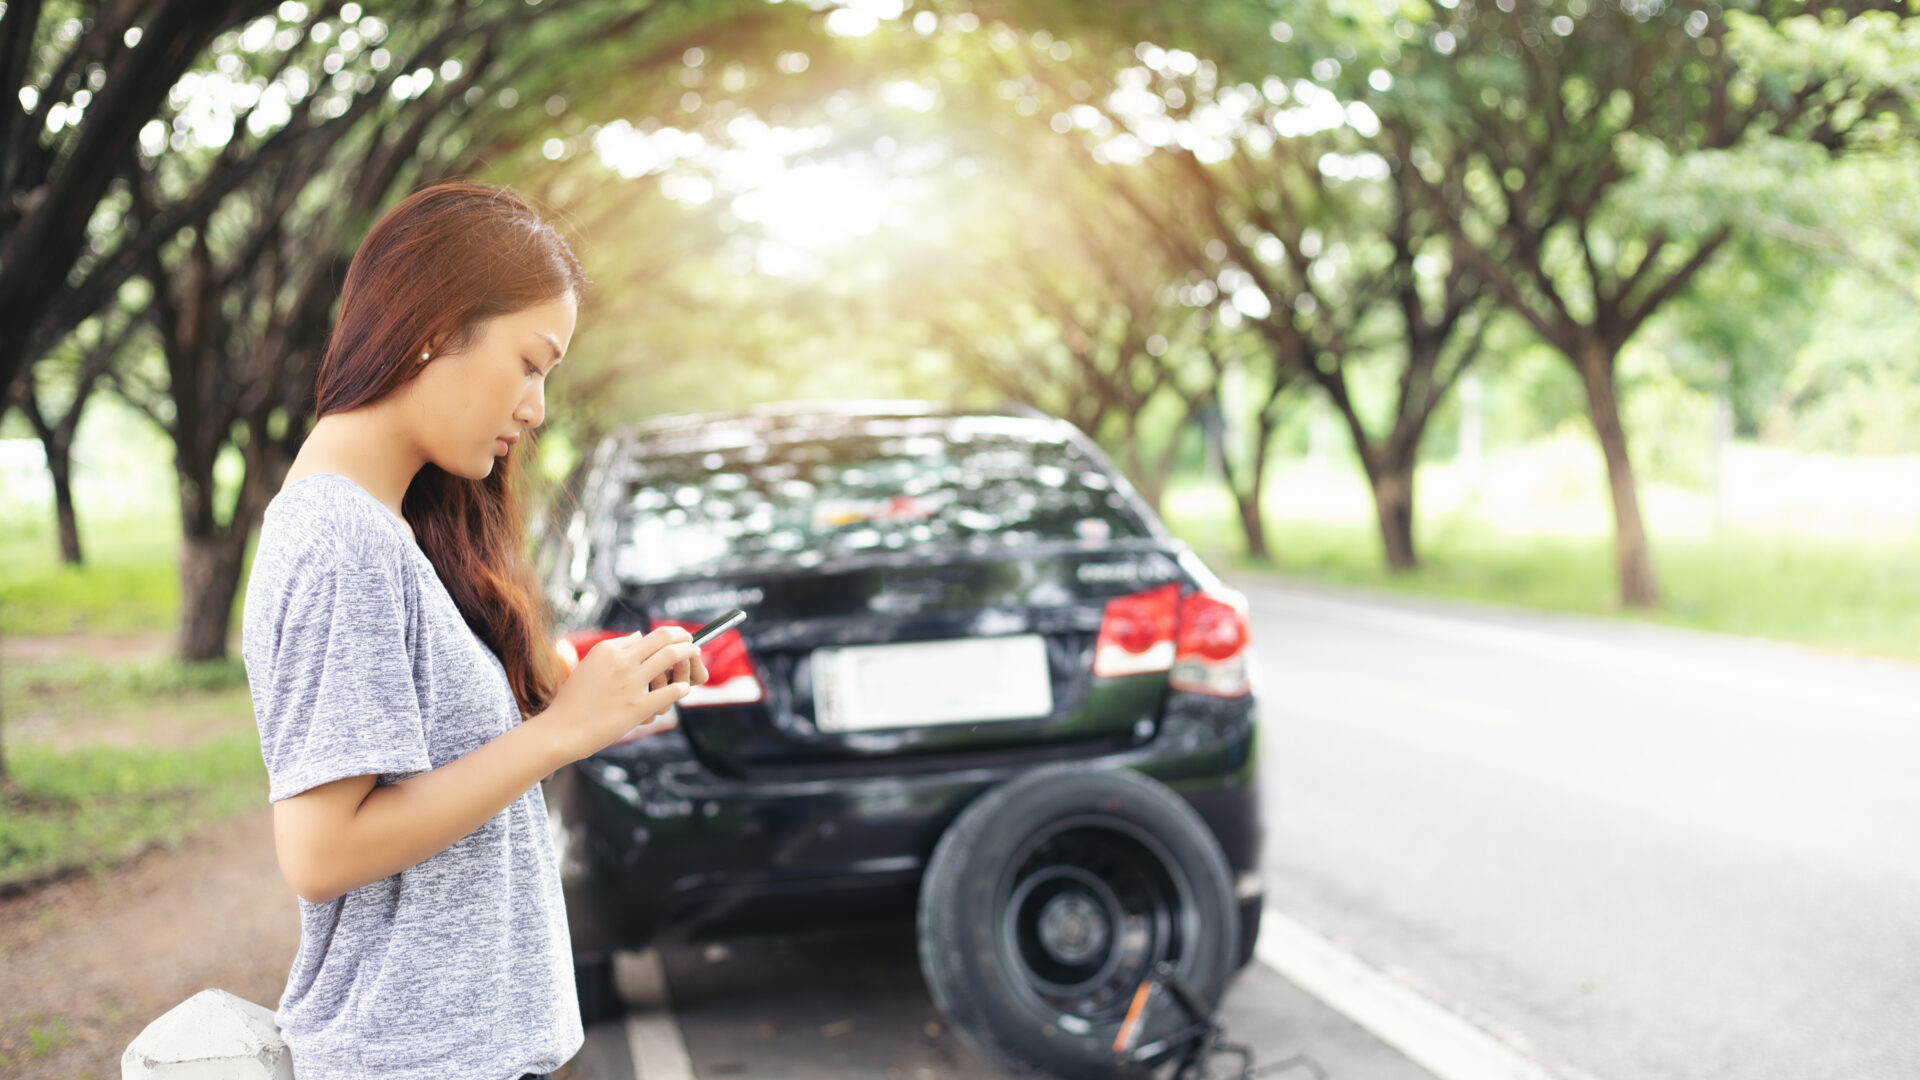 Women standing on the side of the road on her phone, next to a car.